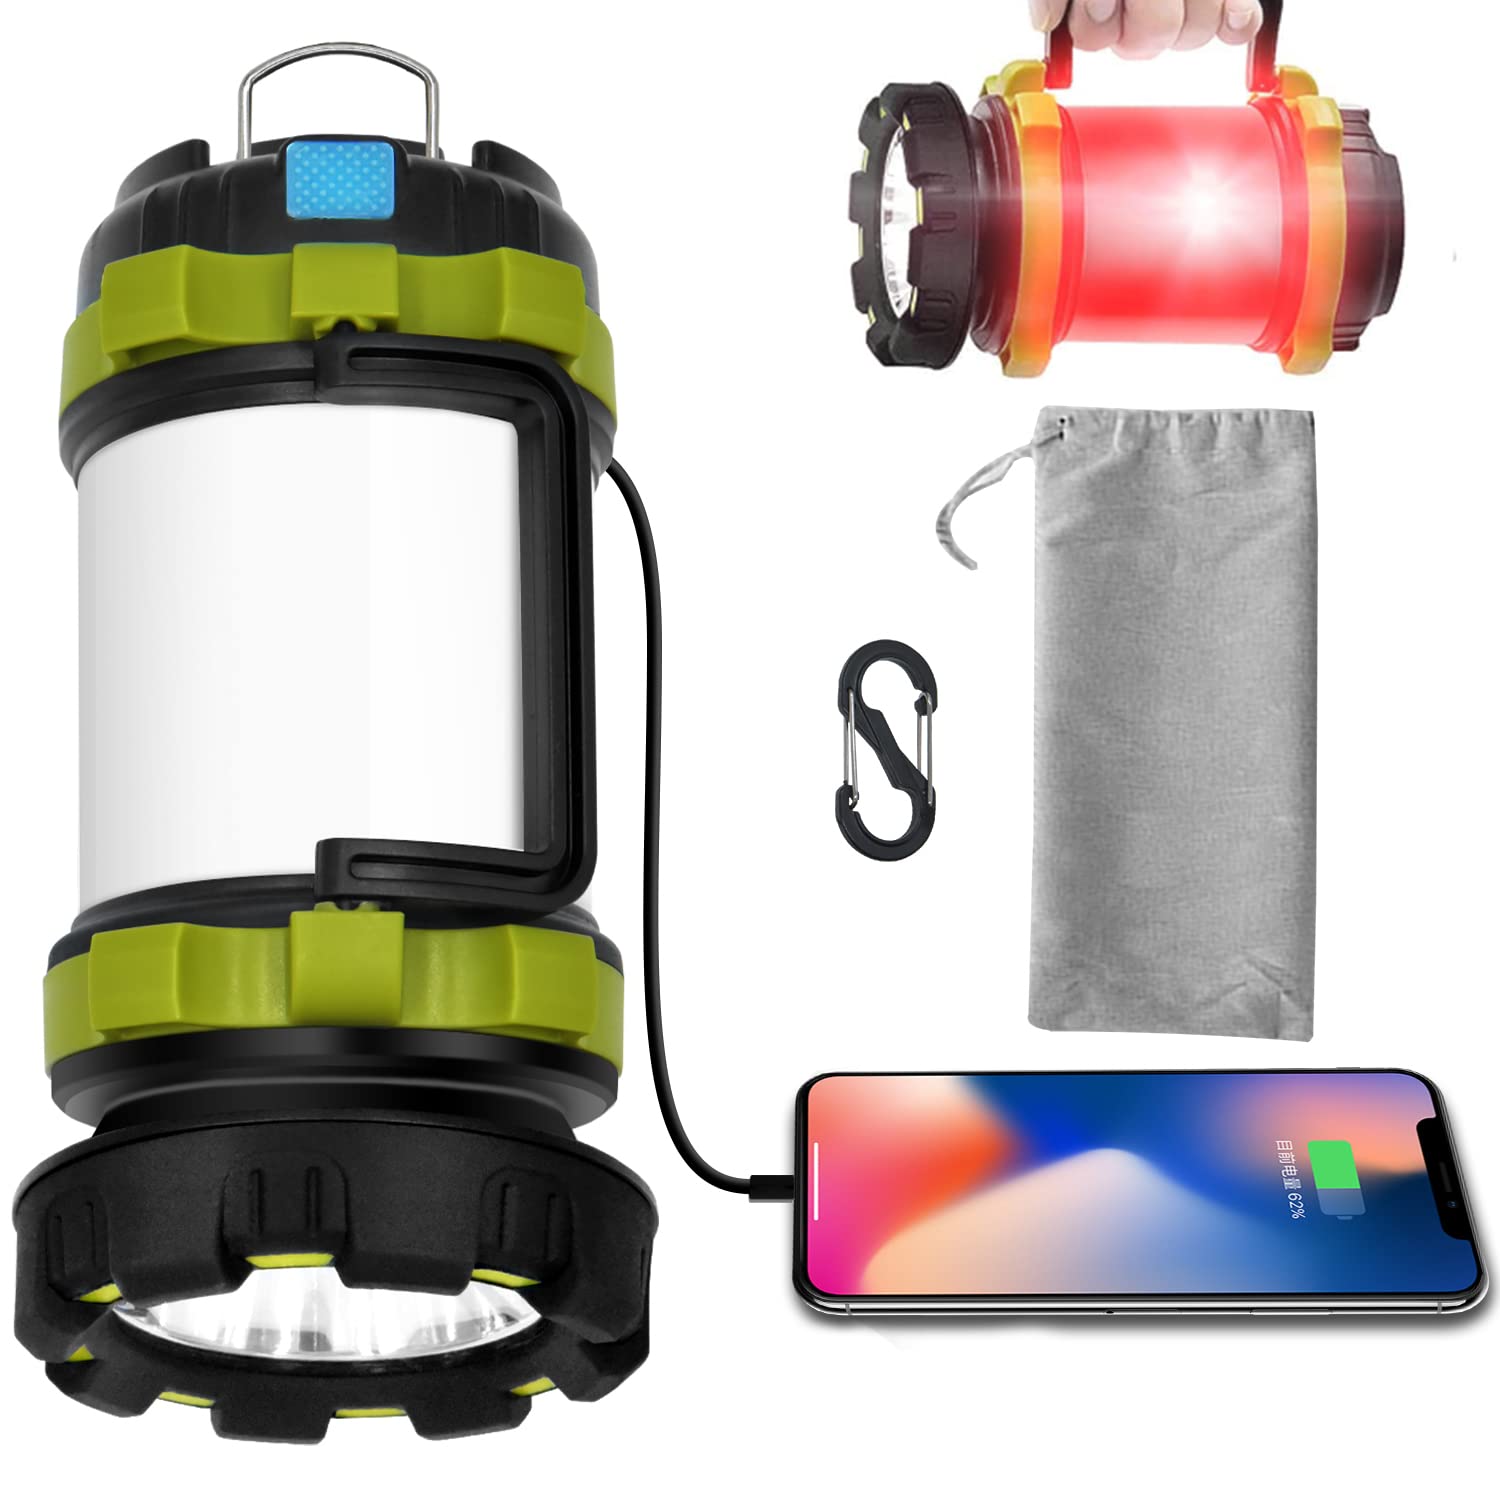 Outdoor Camping Light 60LED Rechargeable Portable Hanging Tent